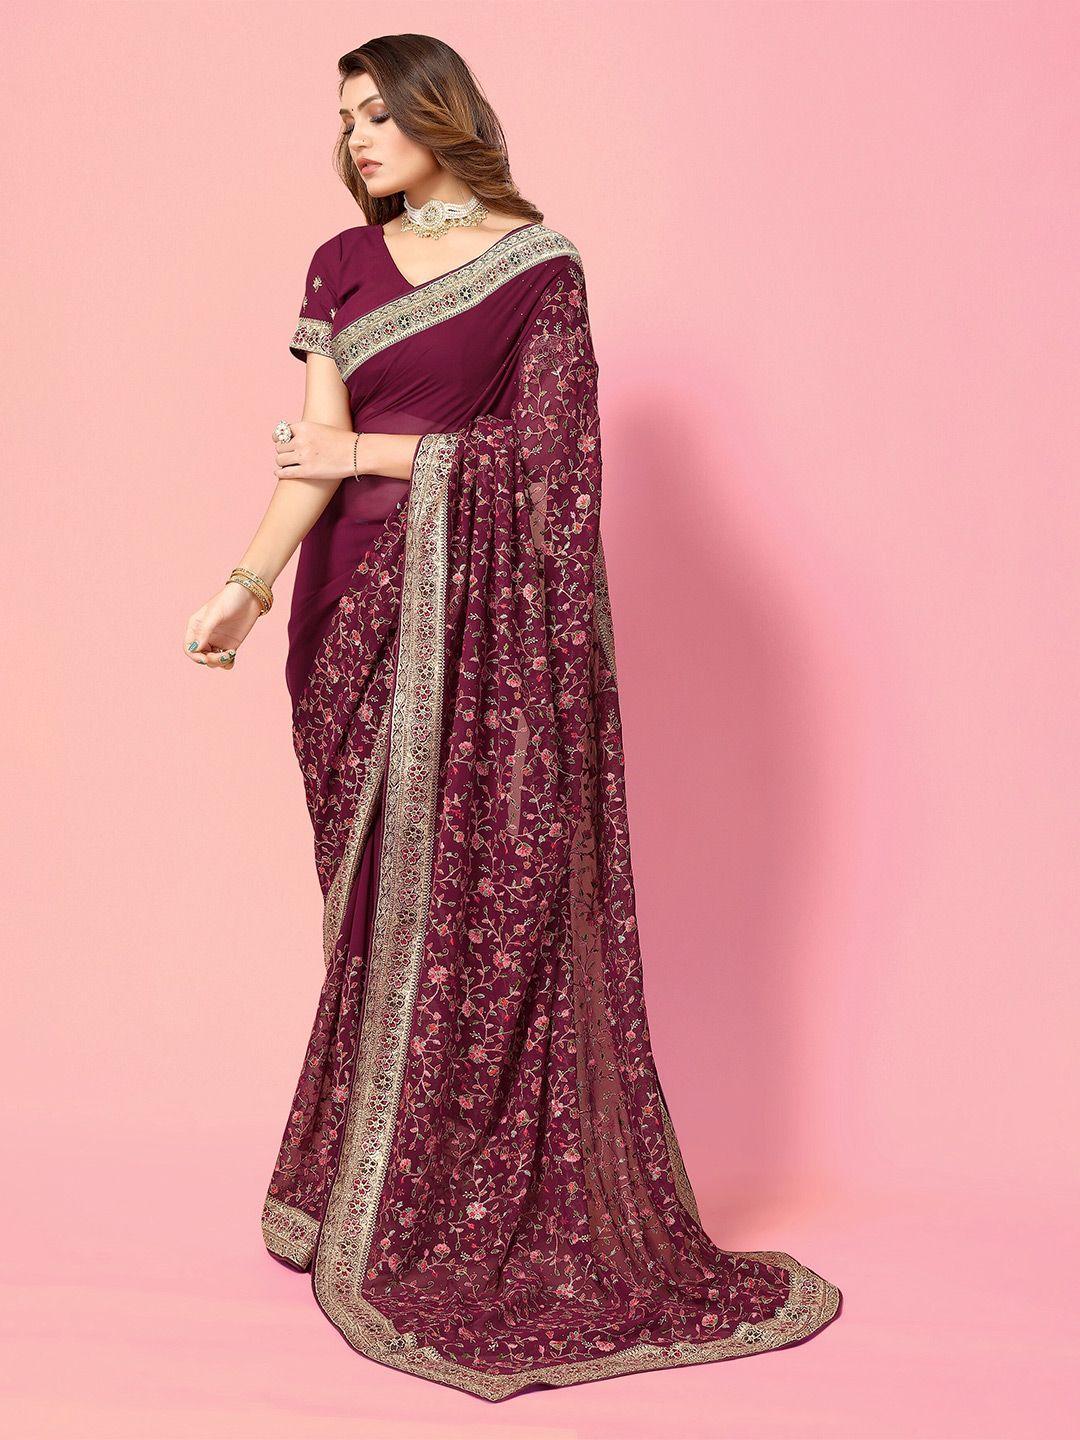 all about you floral embroidered saree